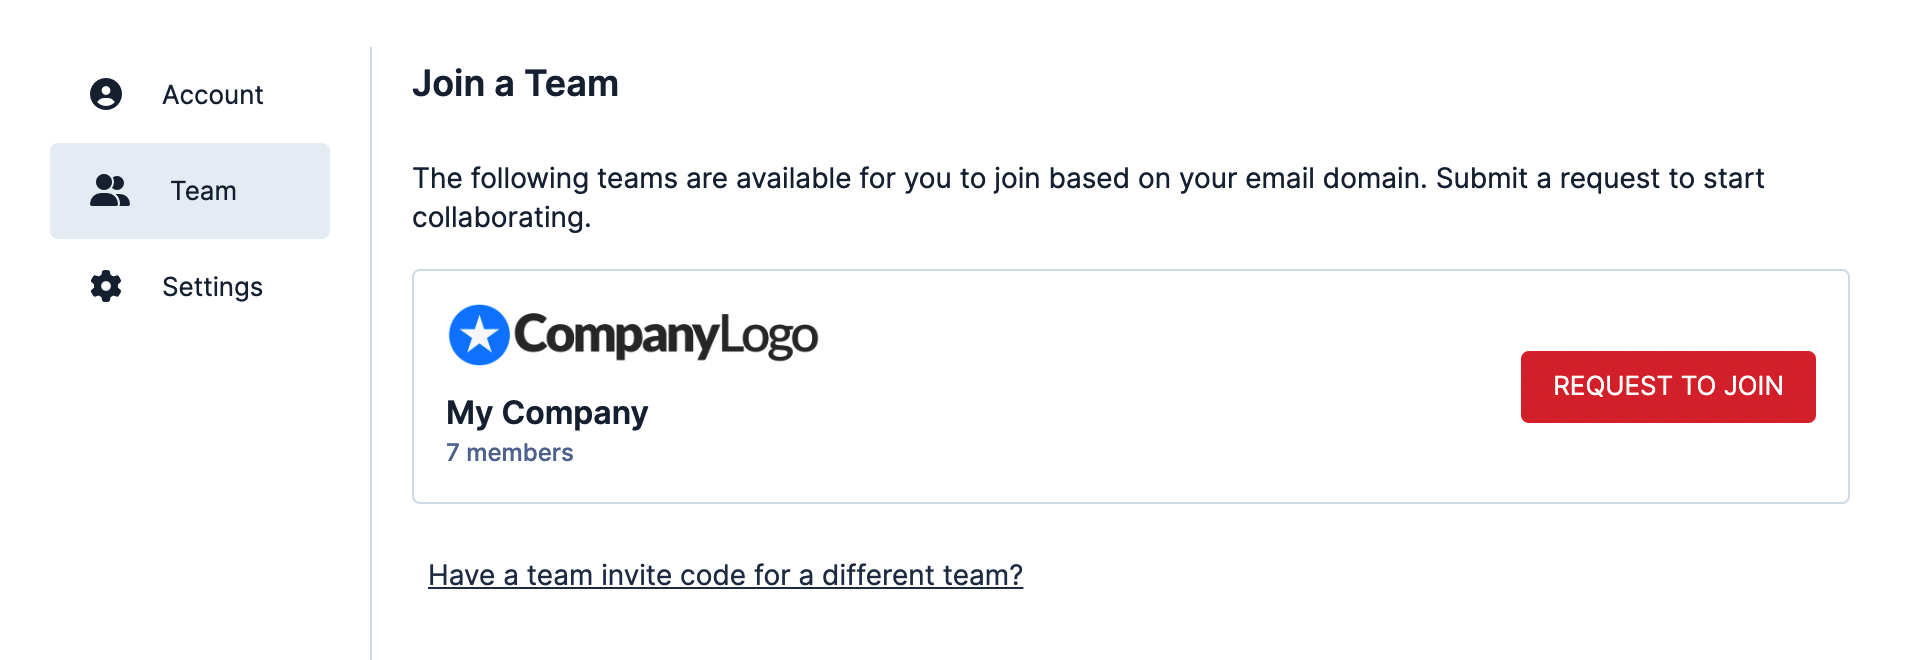 existing user_join team _team page_dec23.png